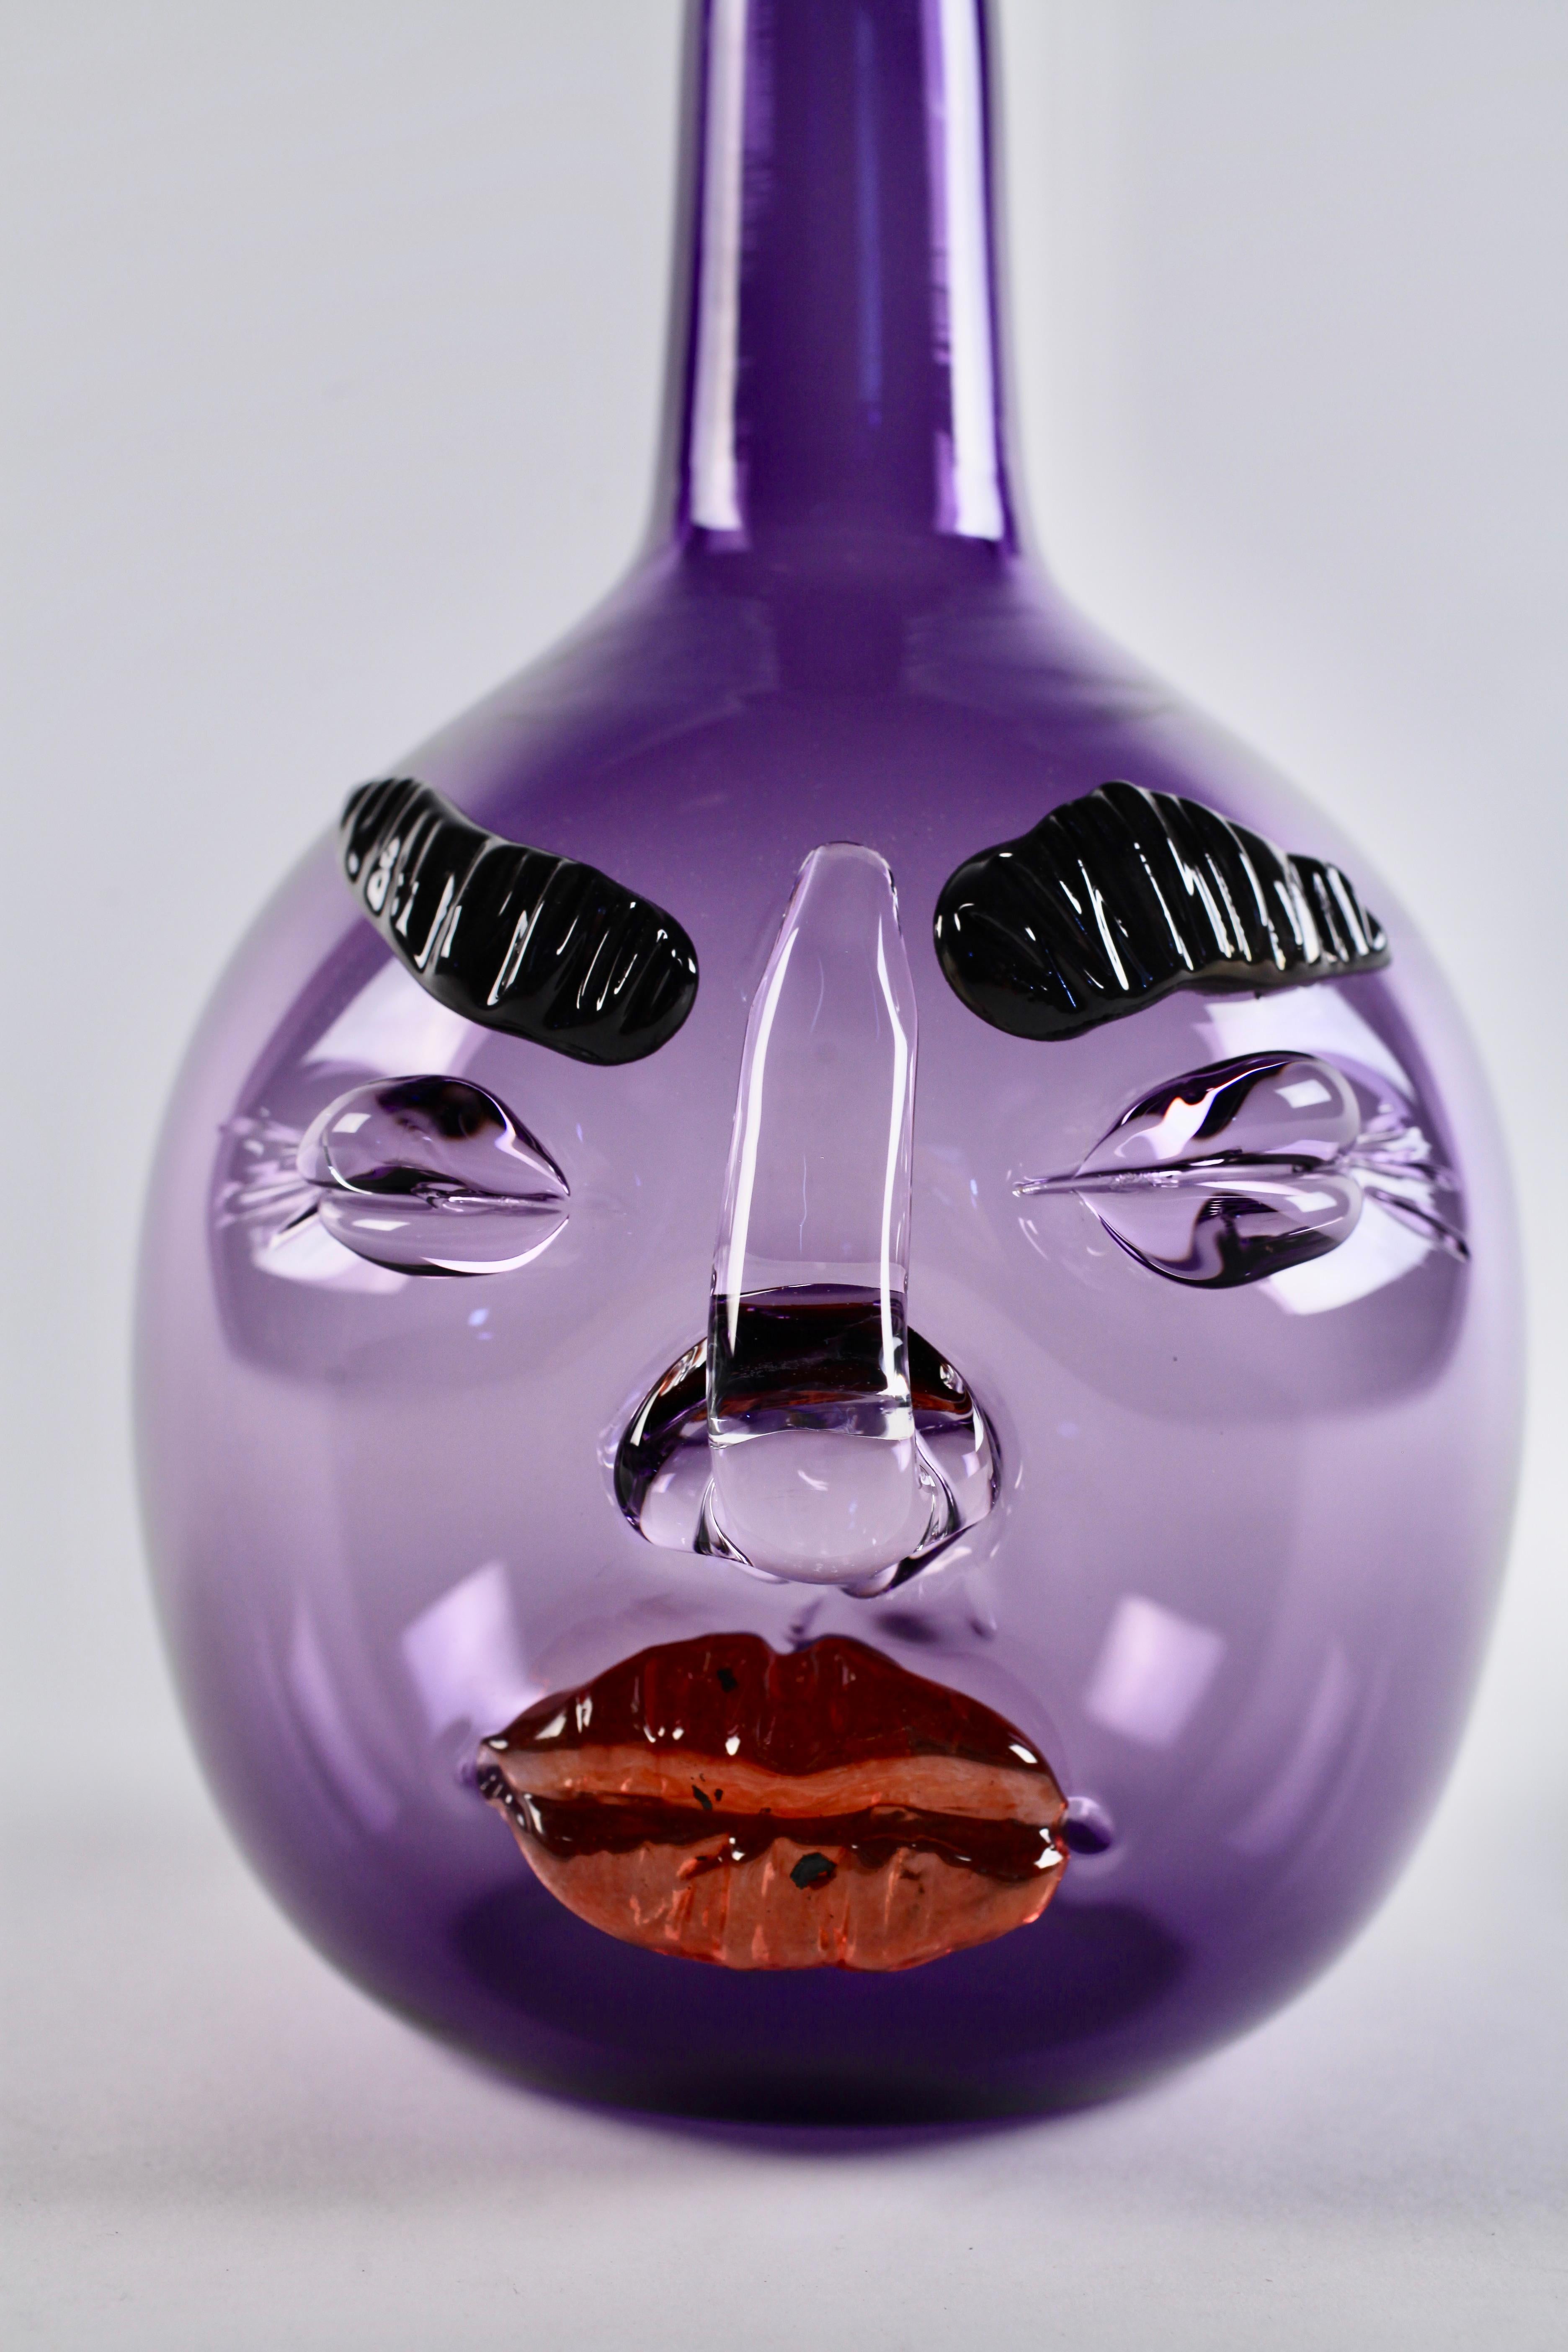 Hand blown and hot sculpted glass, this purple Bottle-head vessel by Elizabeth Lyons is both playful and sophisticated, blooming with a personality all its own. Elizabeth makes these sculptural hand blown bottles in her Rochester, NY studio. Their